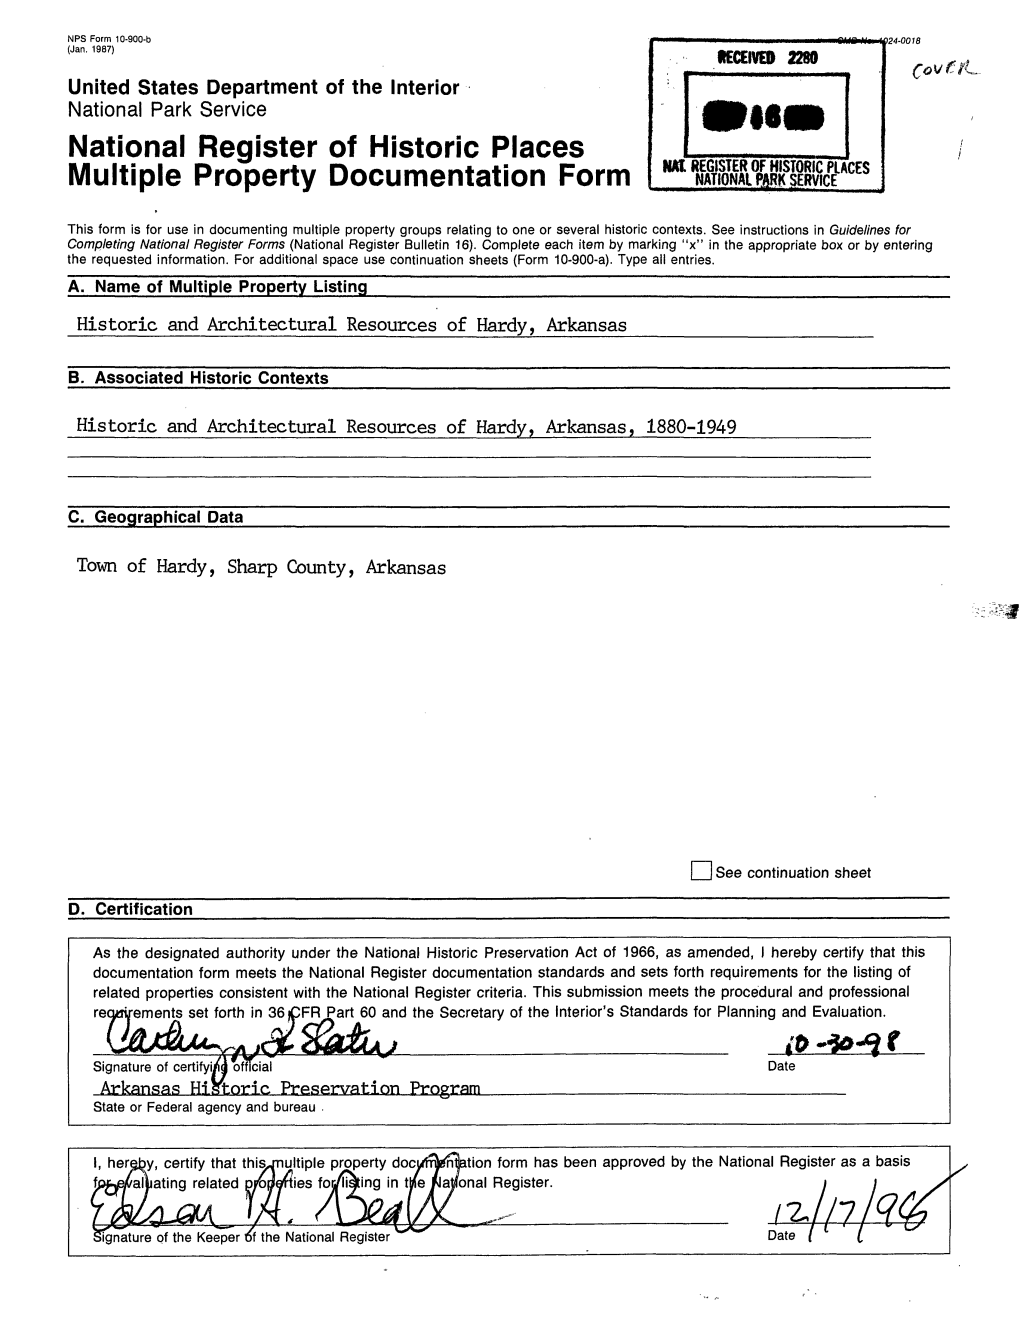 It./P/Qti' Signature of the Keeper of the National Register Date / L * I ^ ~ NPS Form 10-900-A OMB Approval No